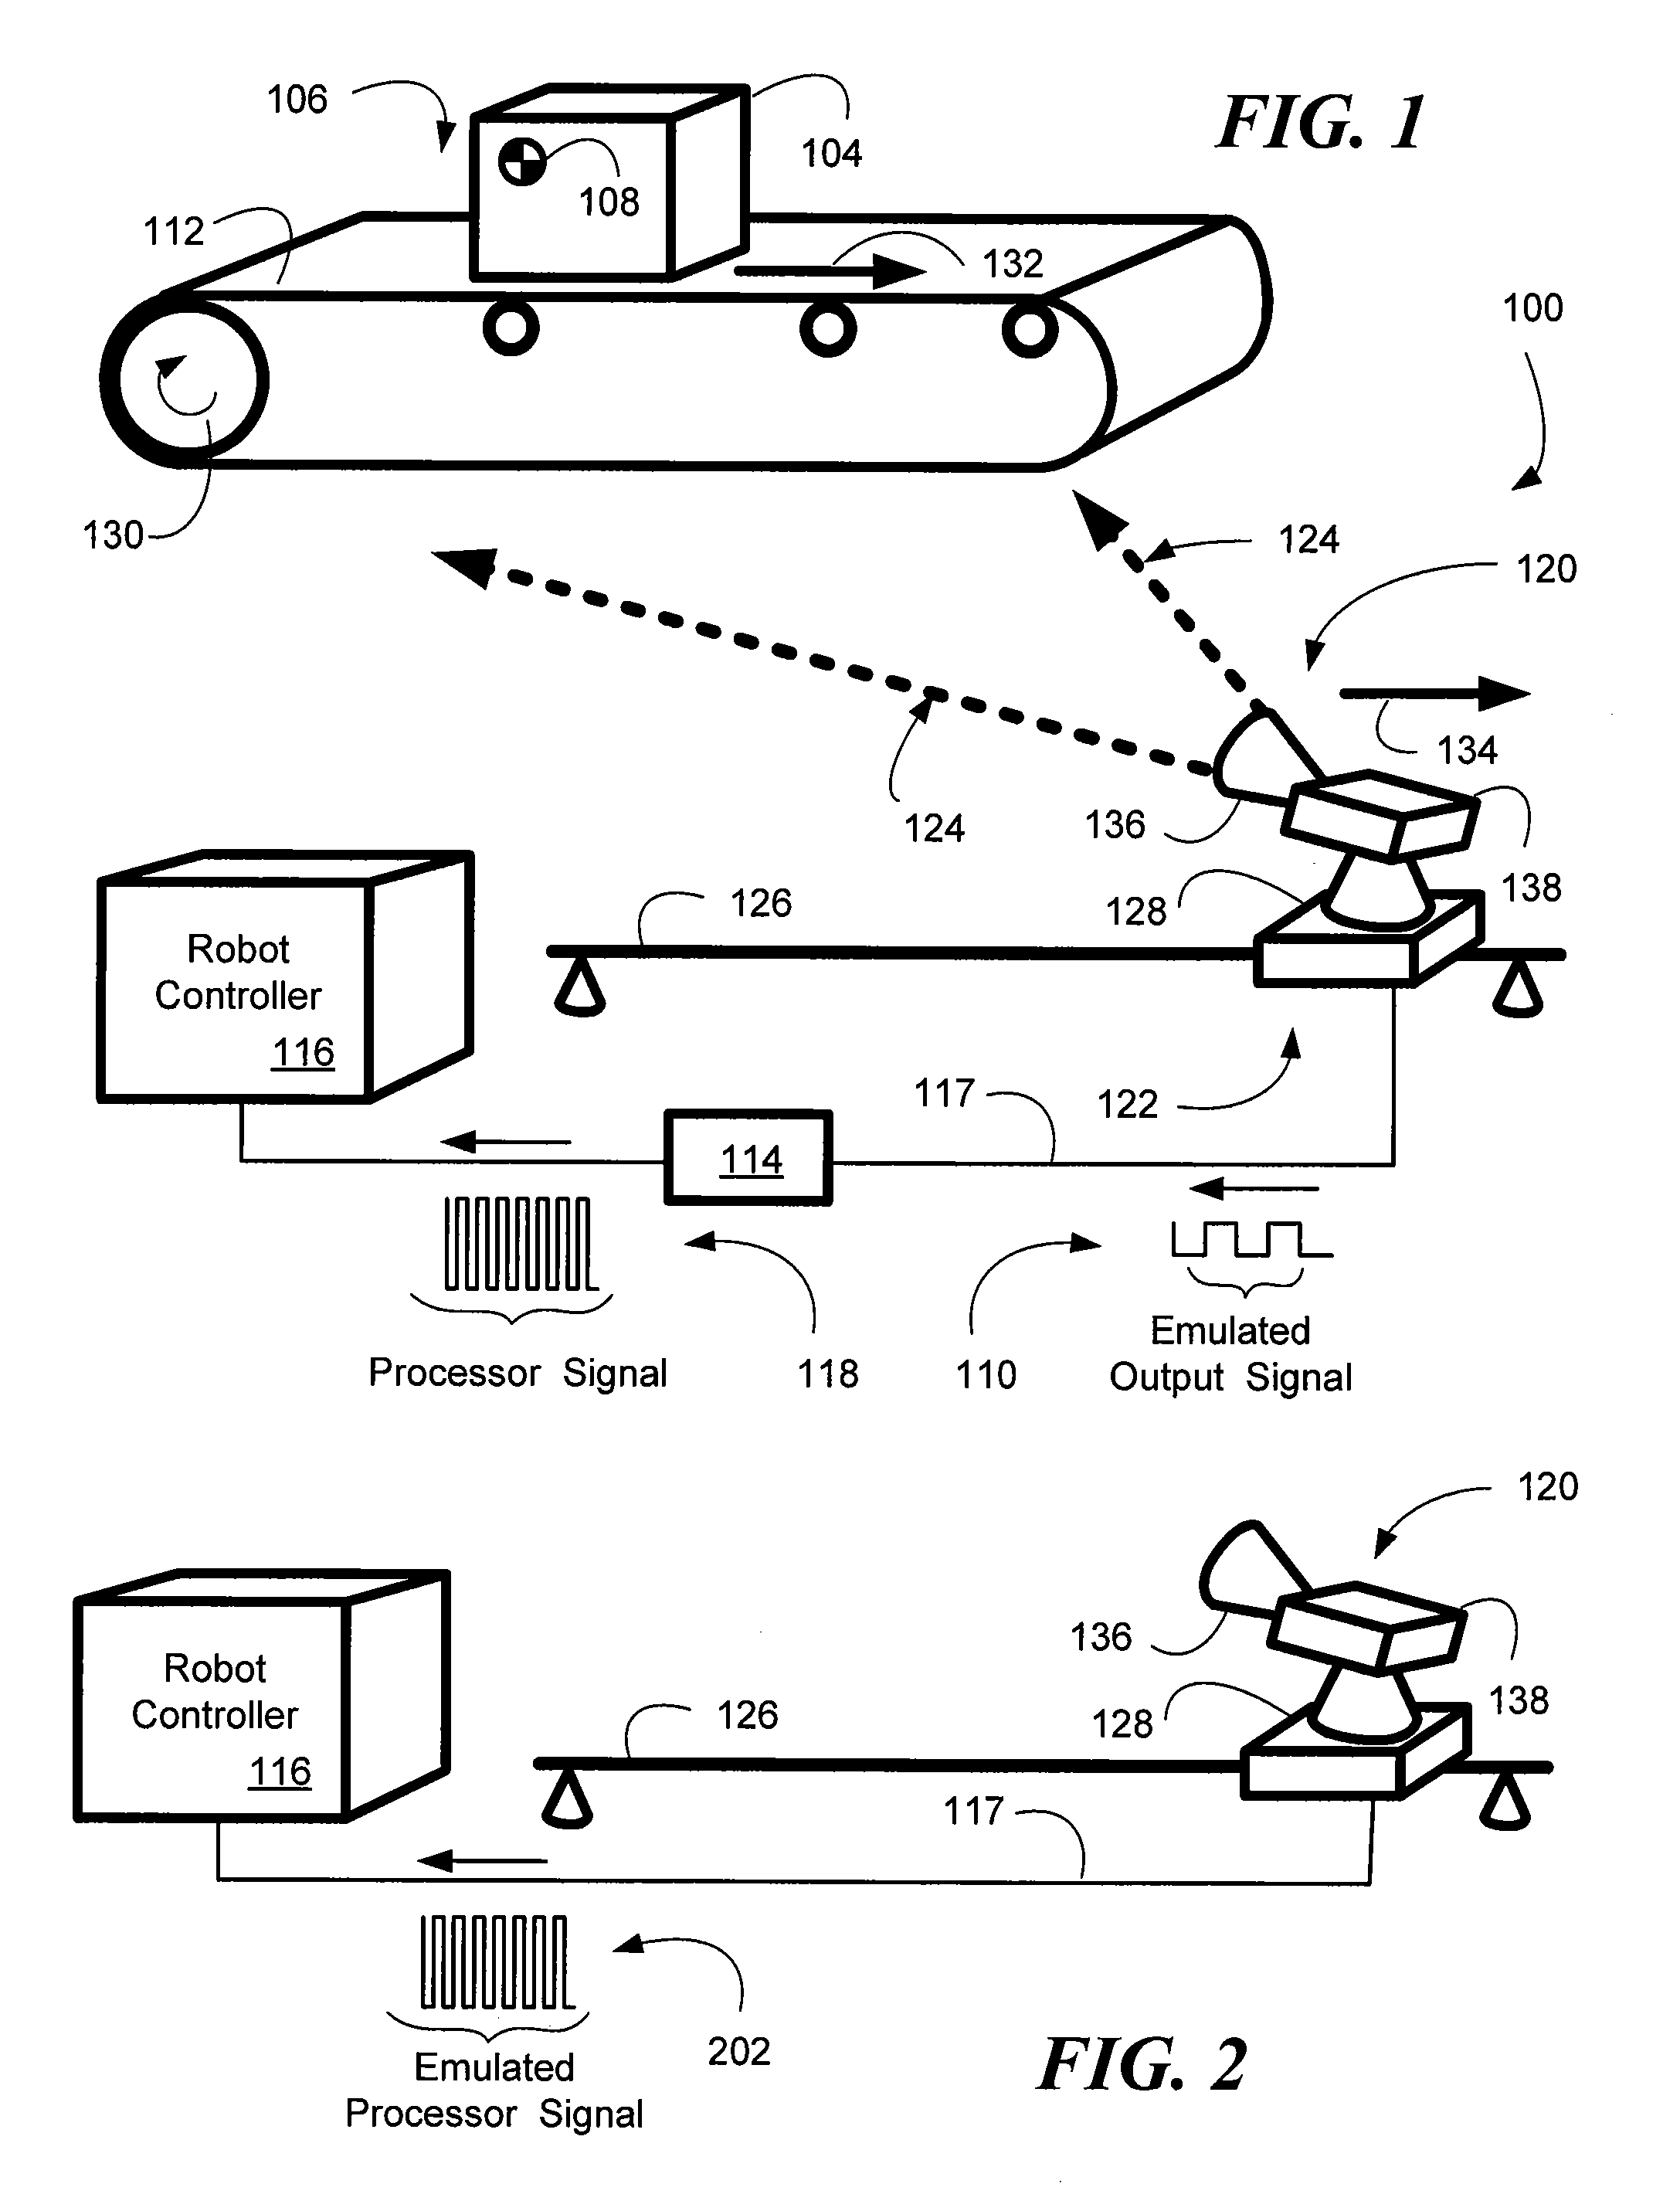 System and method of visual tracking